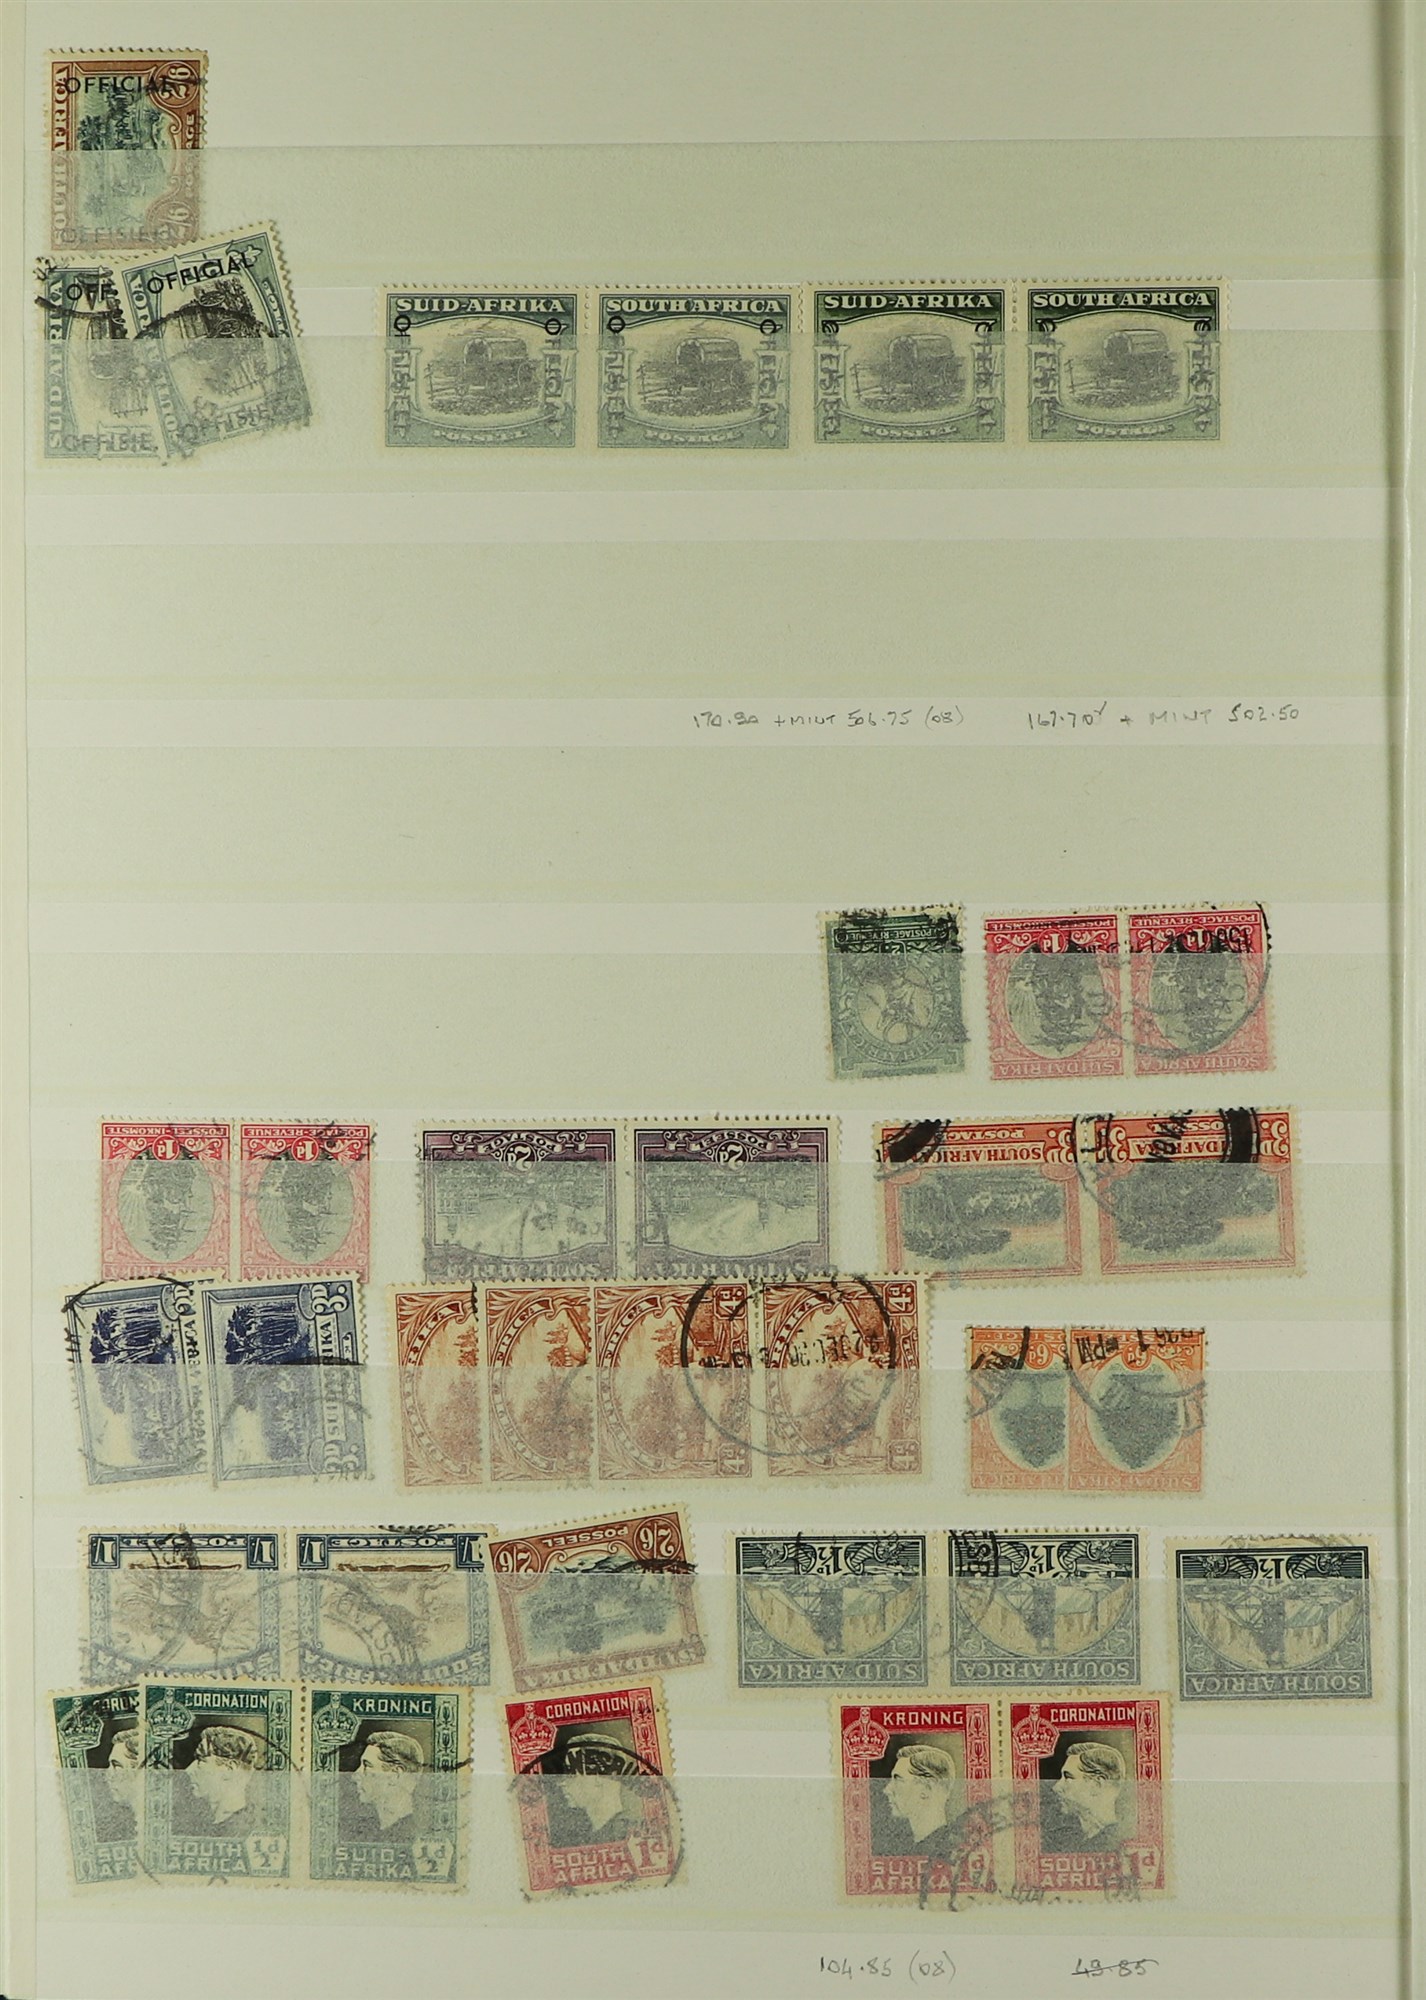 SOUTH AFRICA 1913 - 2000 COLLECTION / ACCUMULATION of 1500+ mint / never hinged mint & used stamps - Image 15 of 15